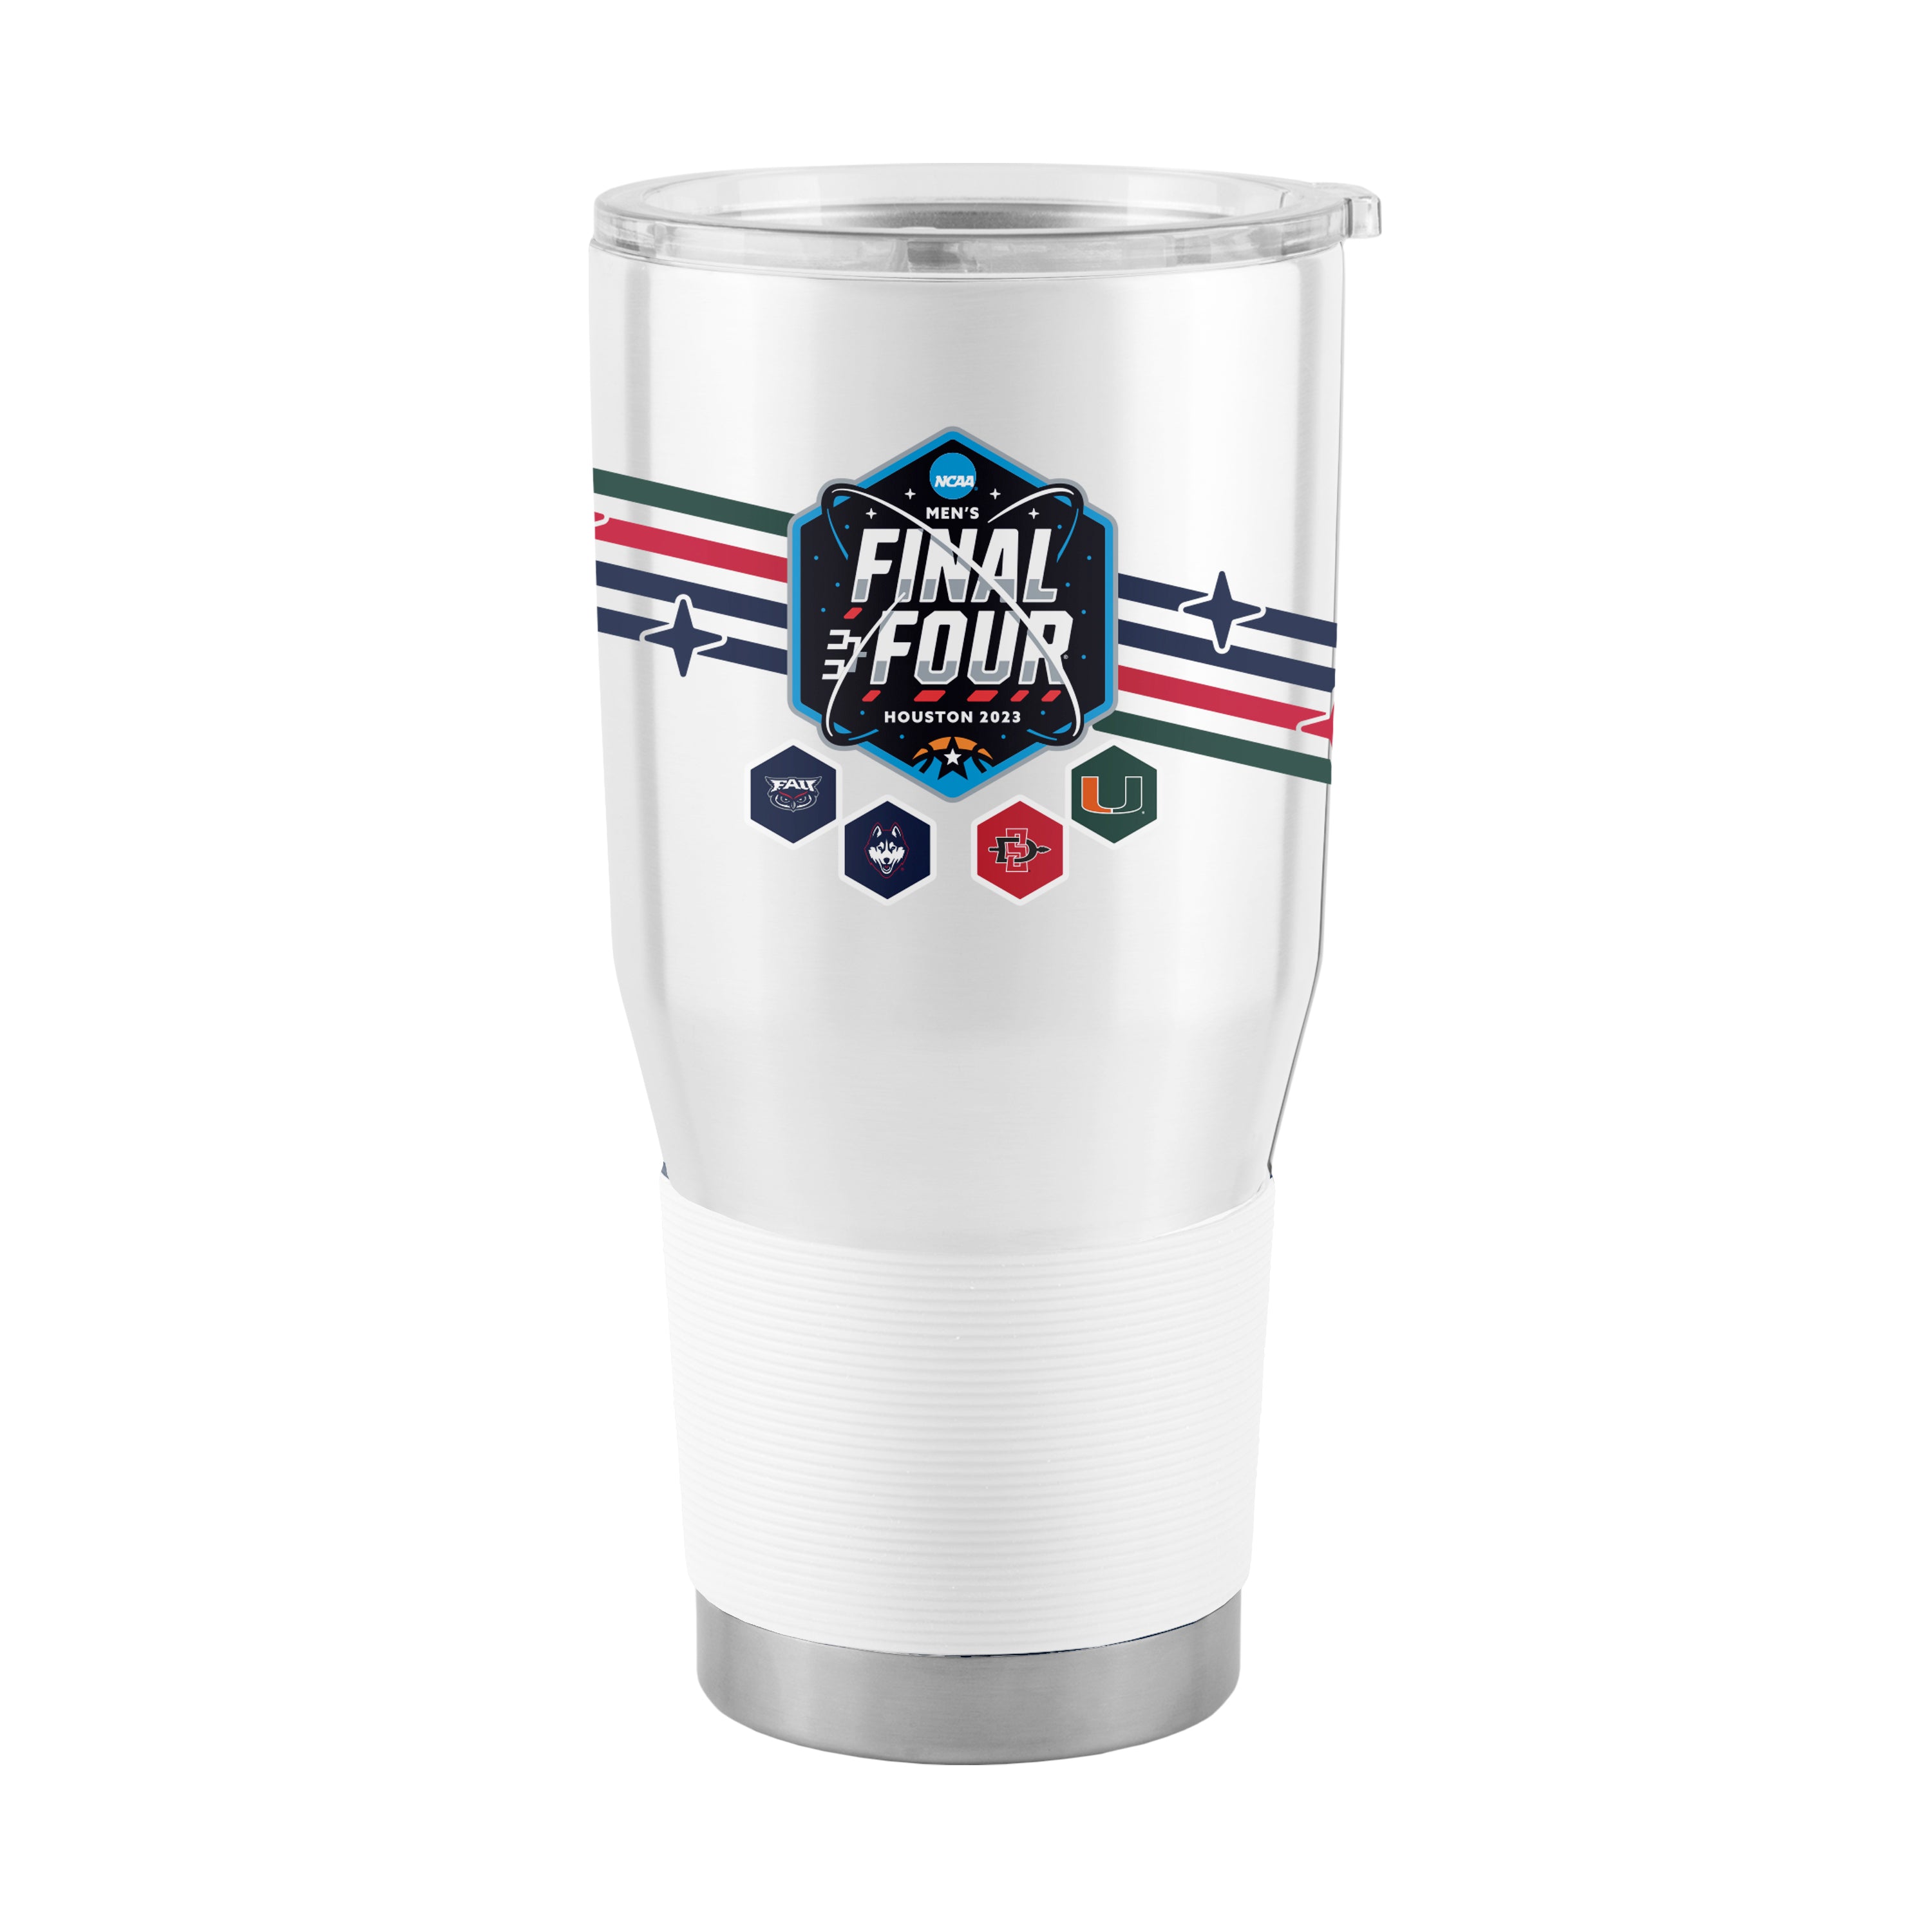 And Then There Were Four Miami Hurricanes FAU Stainles Steel Tumbler - 30 oz